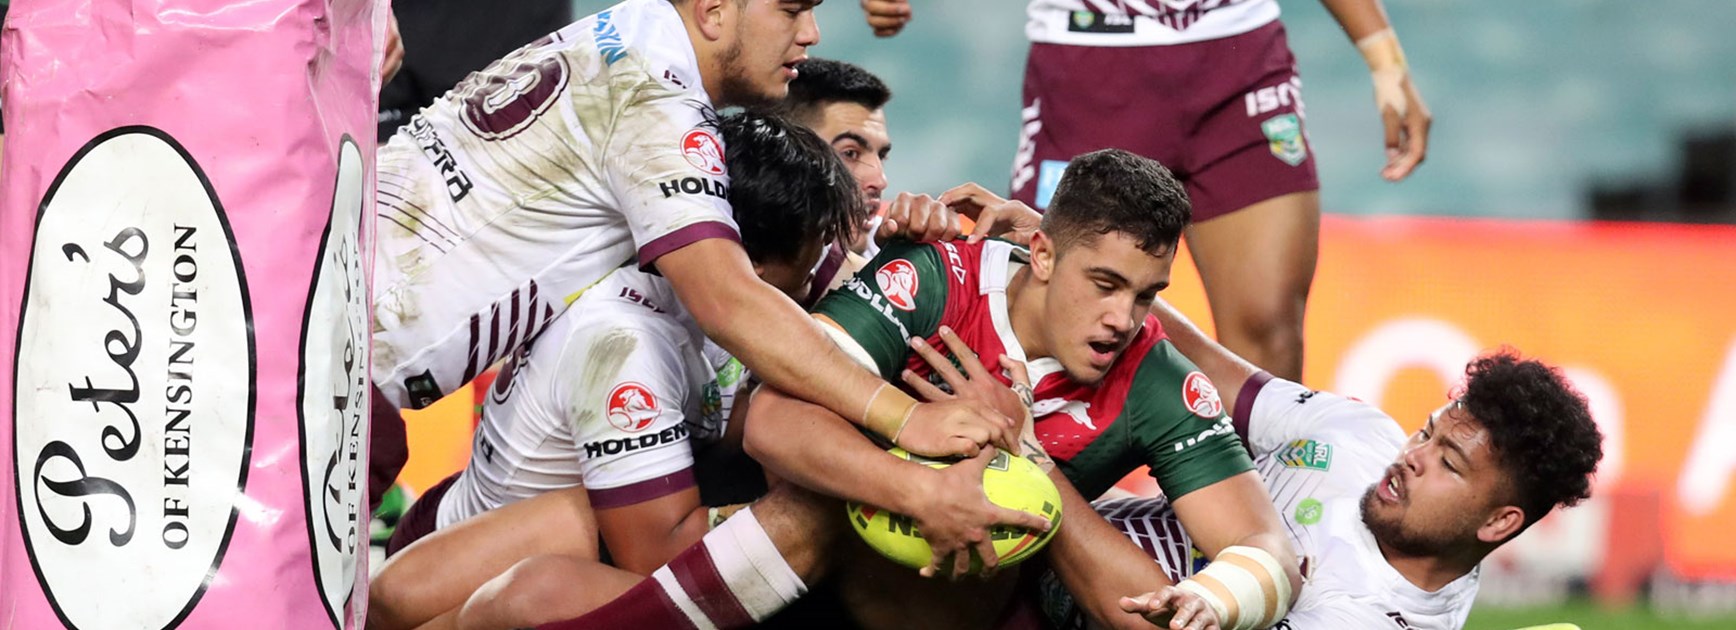 The Rabbitohs downed the Sea Eagles in their Round 20 NYC clash on Monday night.